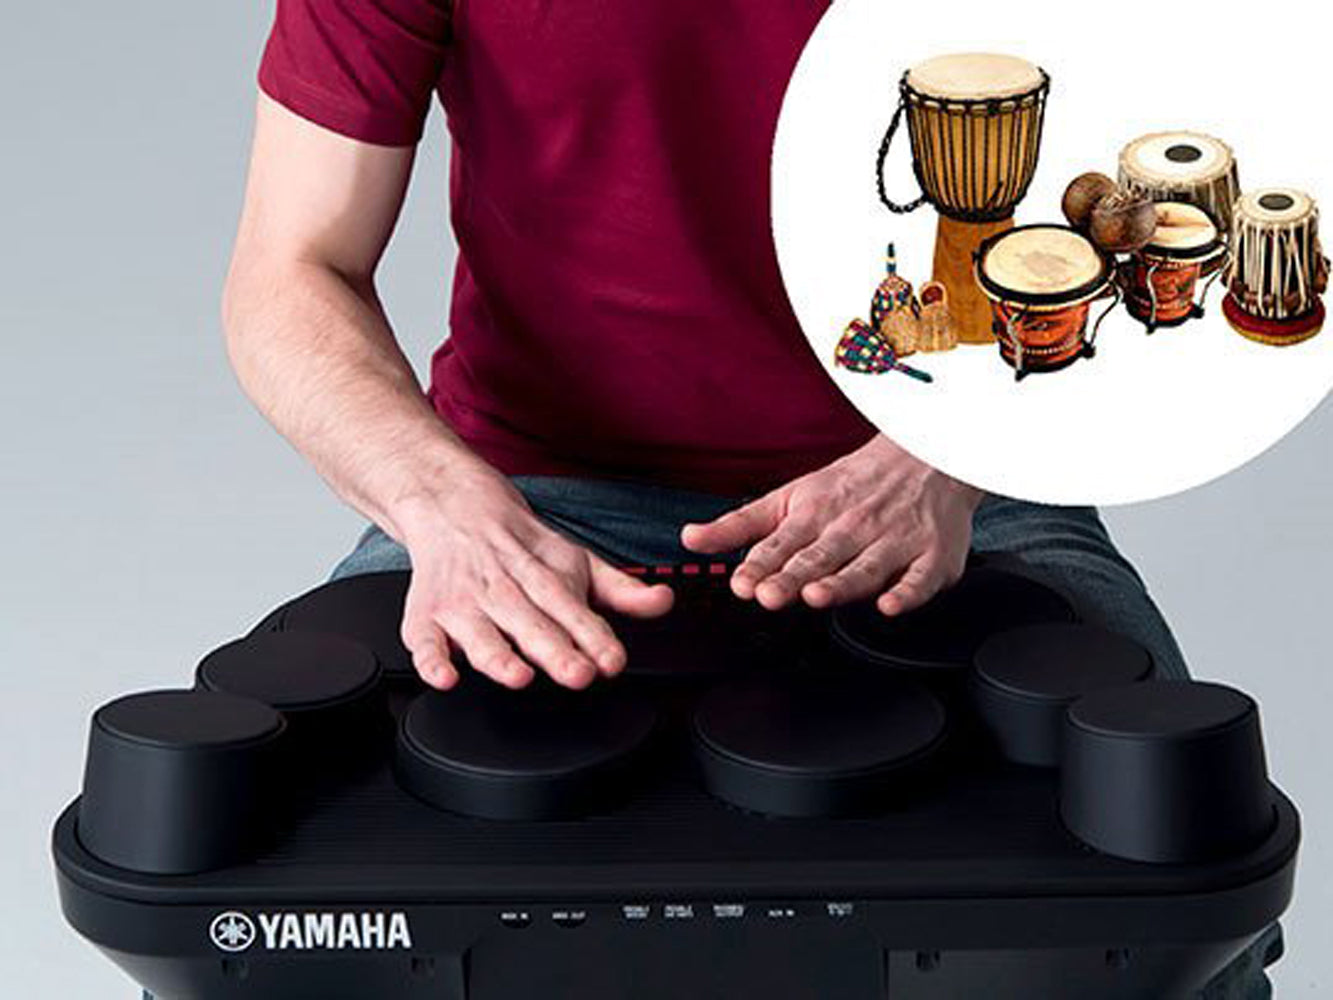 Yamaha DD75 electronic drum set just for beginners?